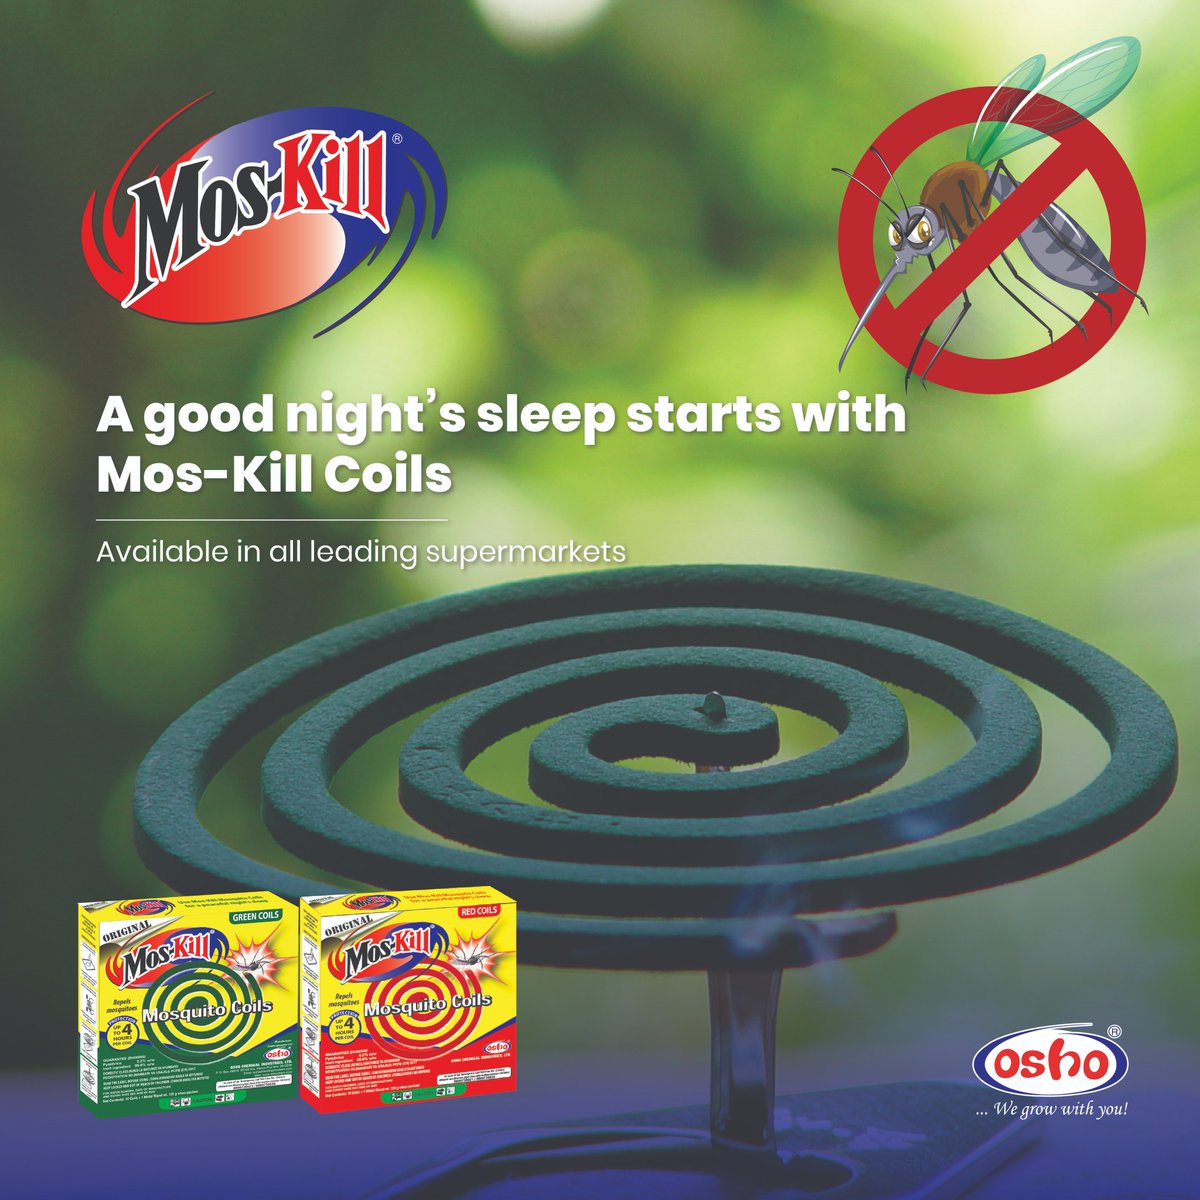 Are mosquitoes robbing you of your peaceful nights? Say goodbye to sleepless nights with Mos-Kill Coils, offering rapid mosquito control and lasting effects. Available at shops and supermarkets near you!